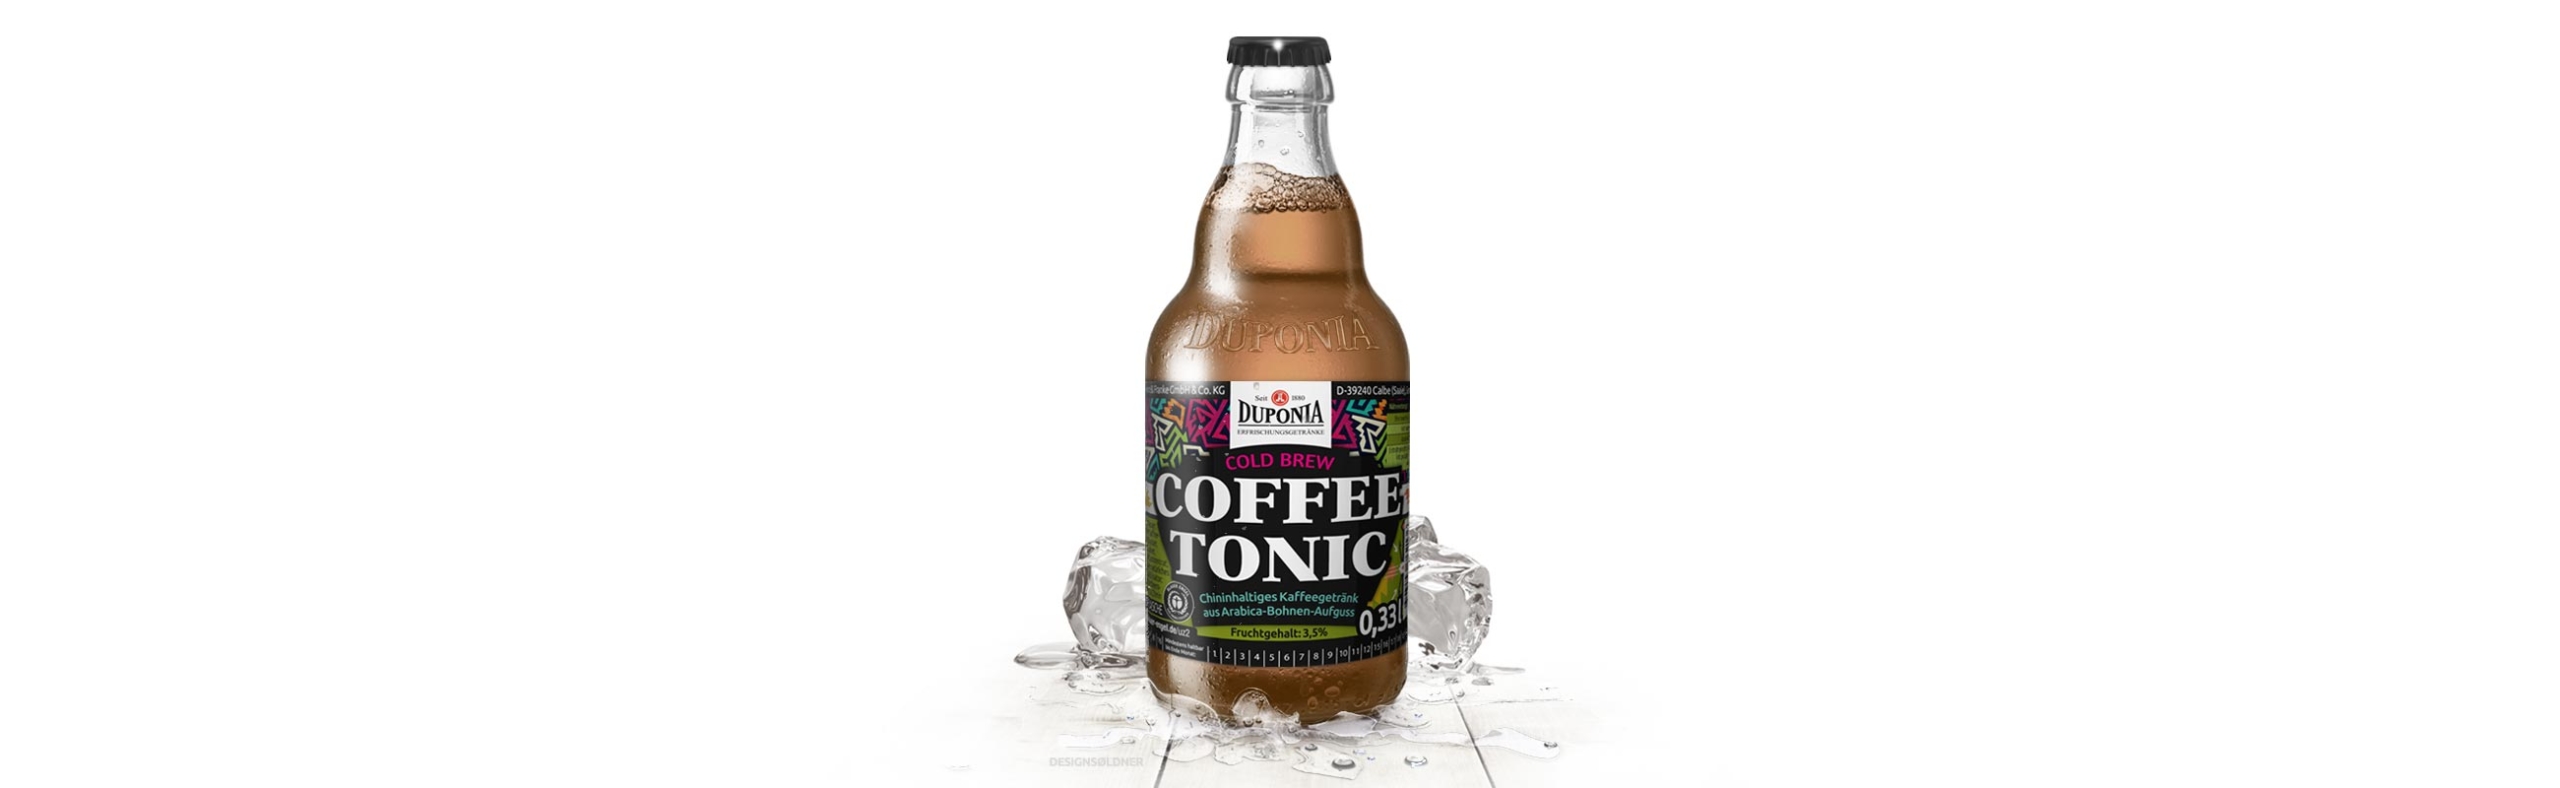 Drink Package Design DUPOINA Coffee Tonic